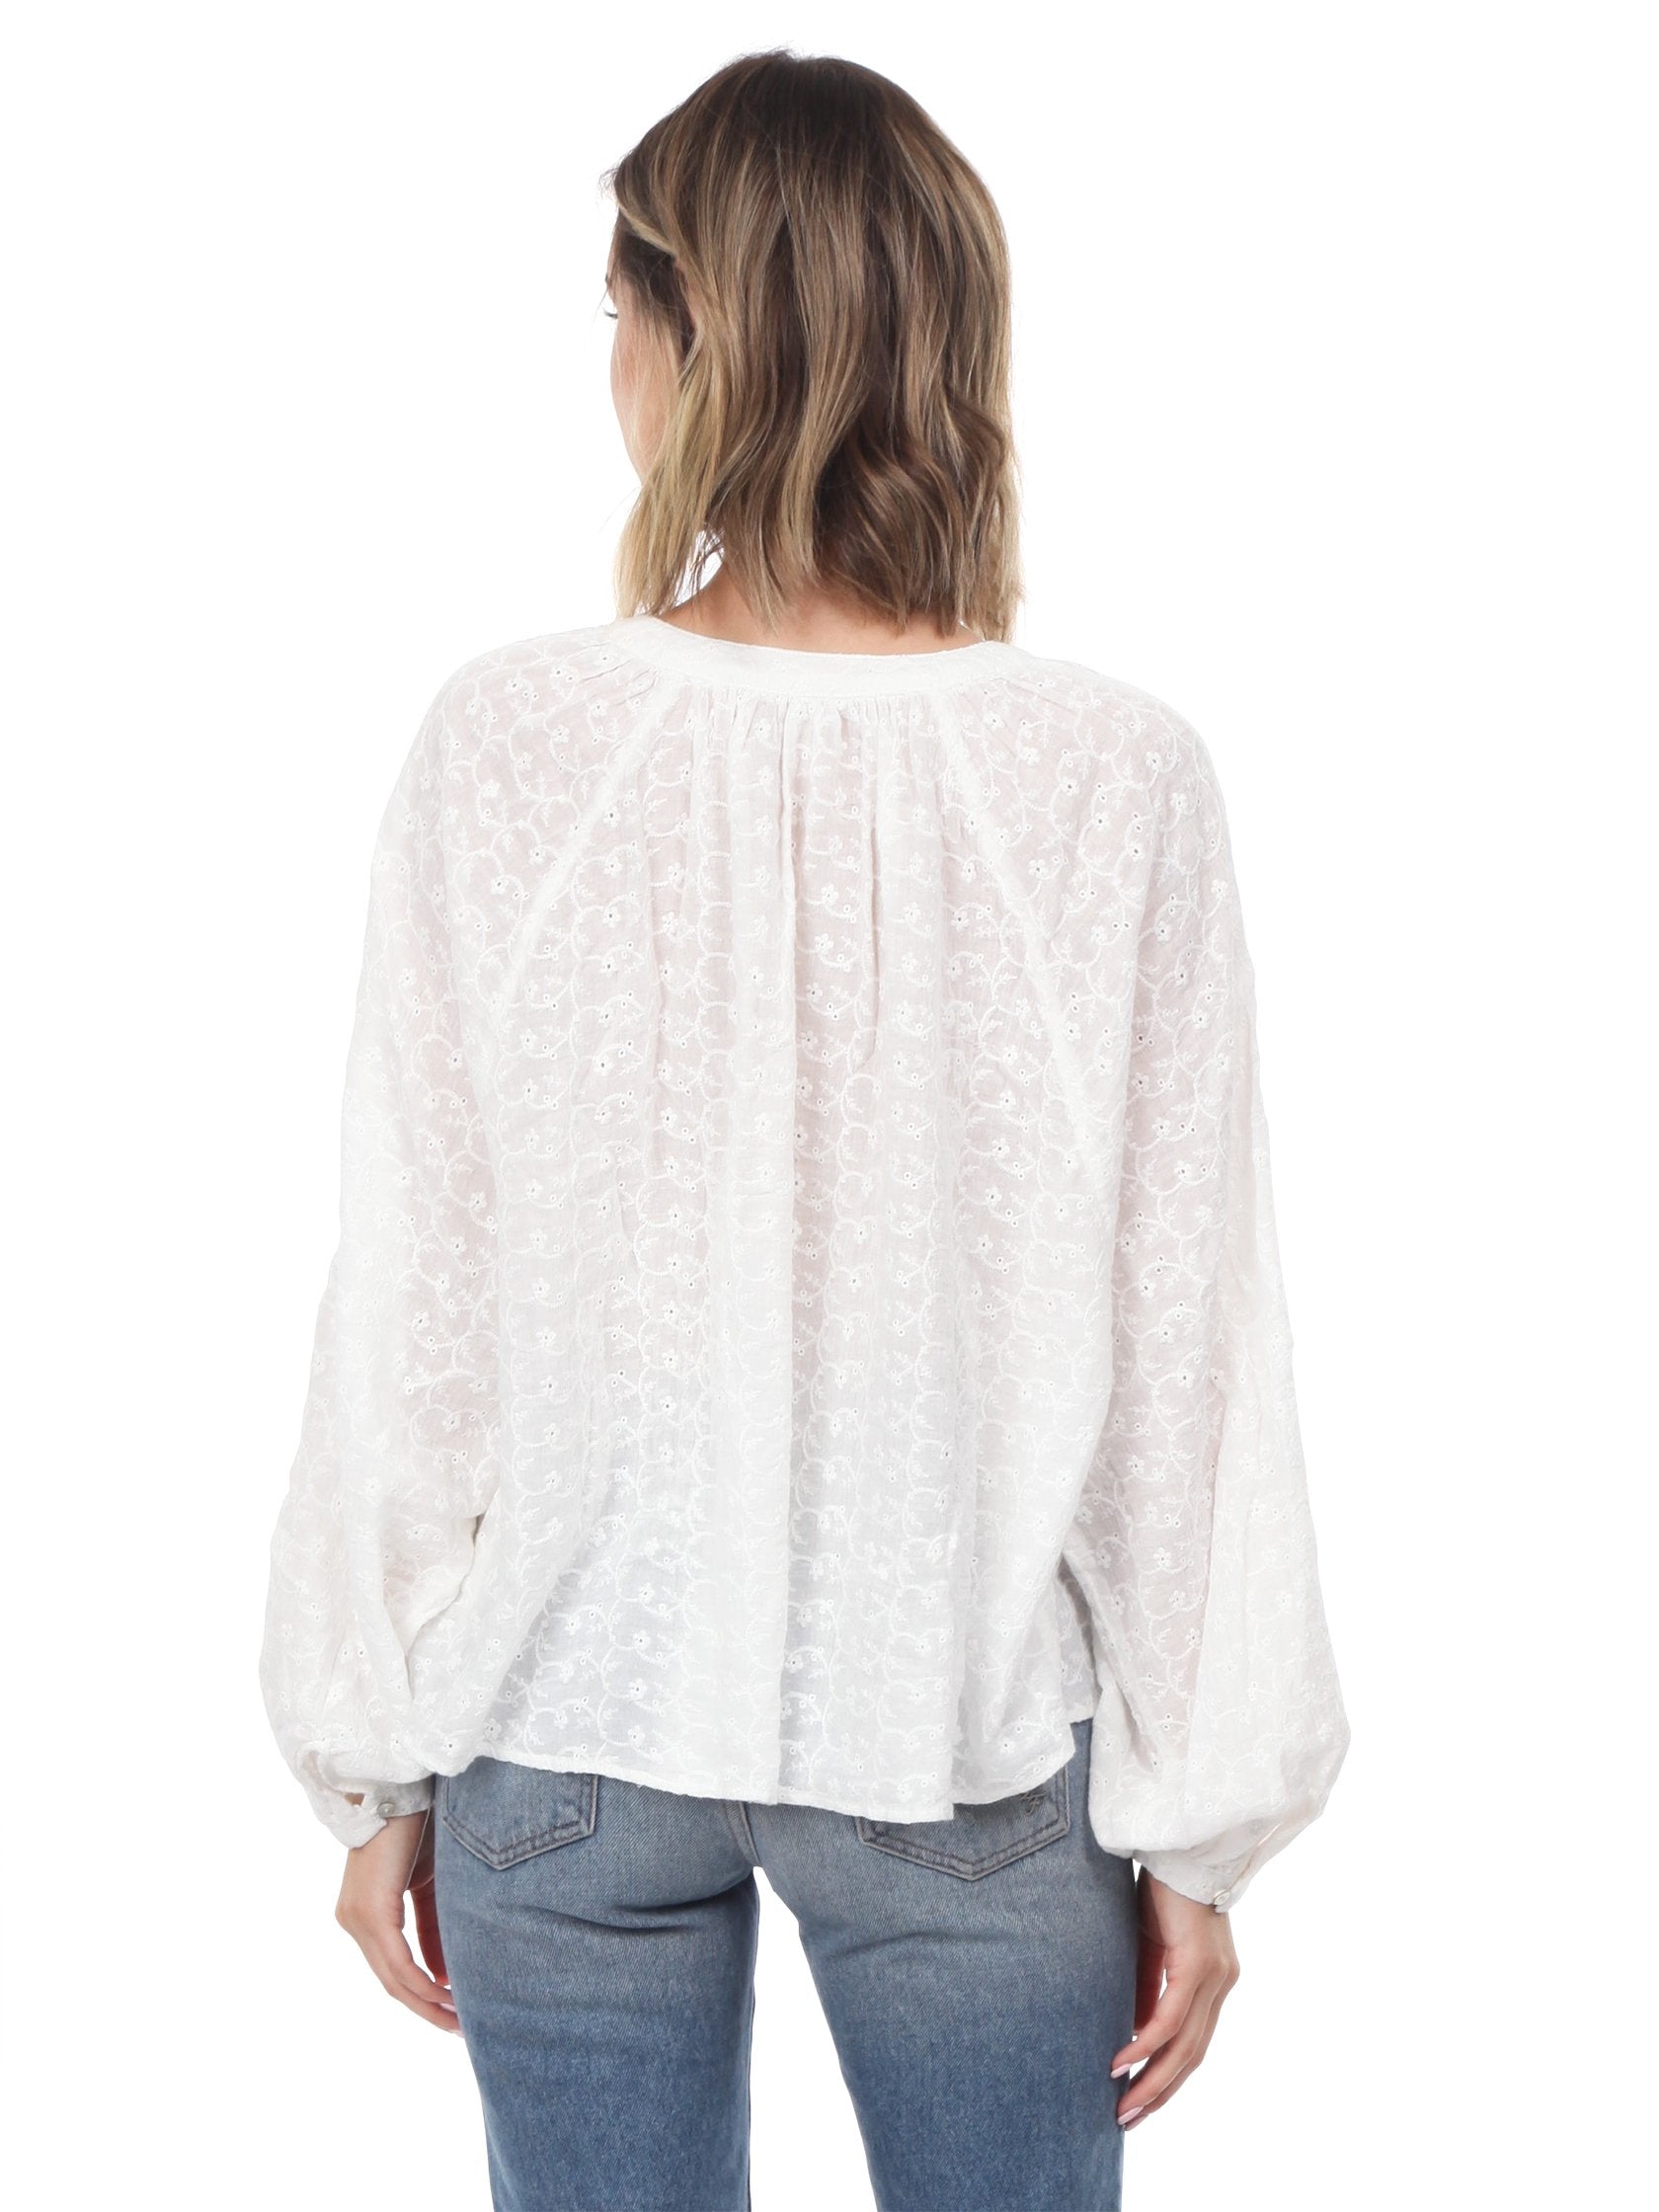 Women outfit in a top rental from Free People called Down From The Clouds Peasant Top